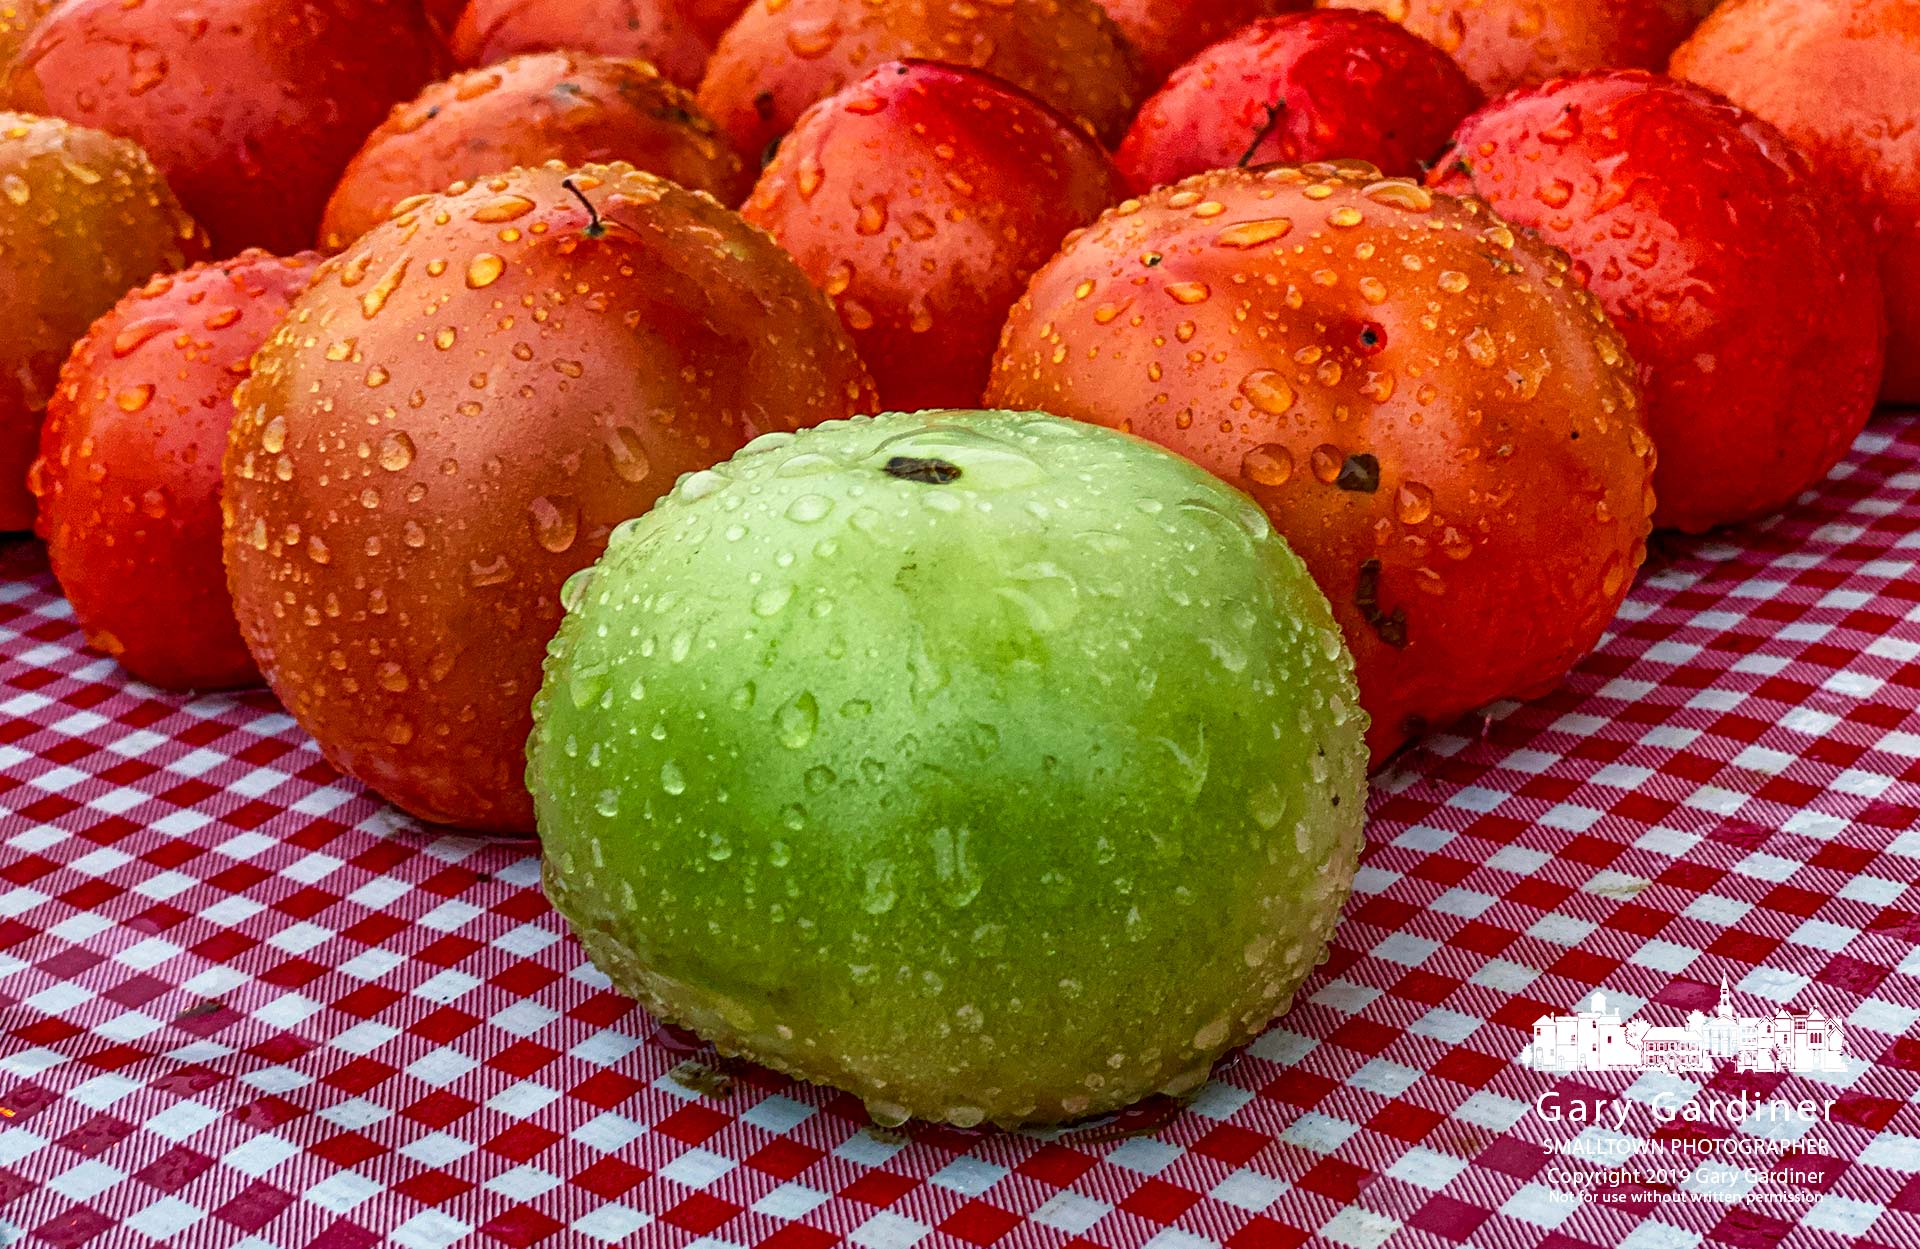 A rain-soaked lone green tomato sits among its riper brethren on the final Wednesday farmers market for the season. My Final Photo for Oct. 30, 2019.